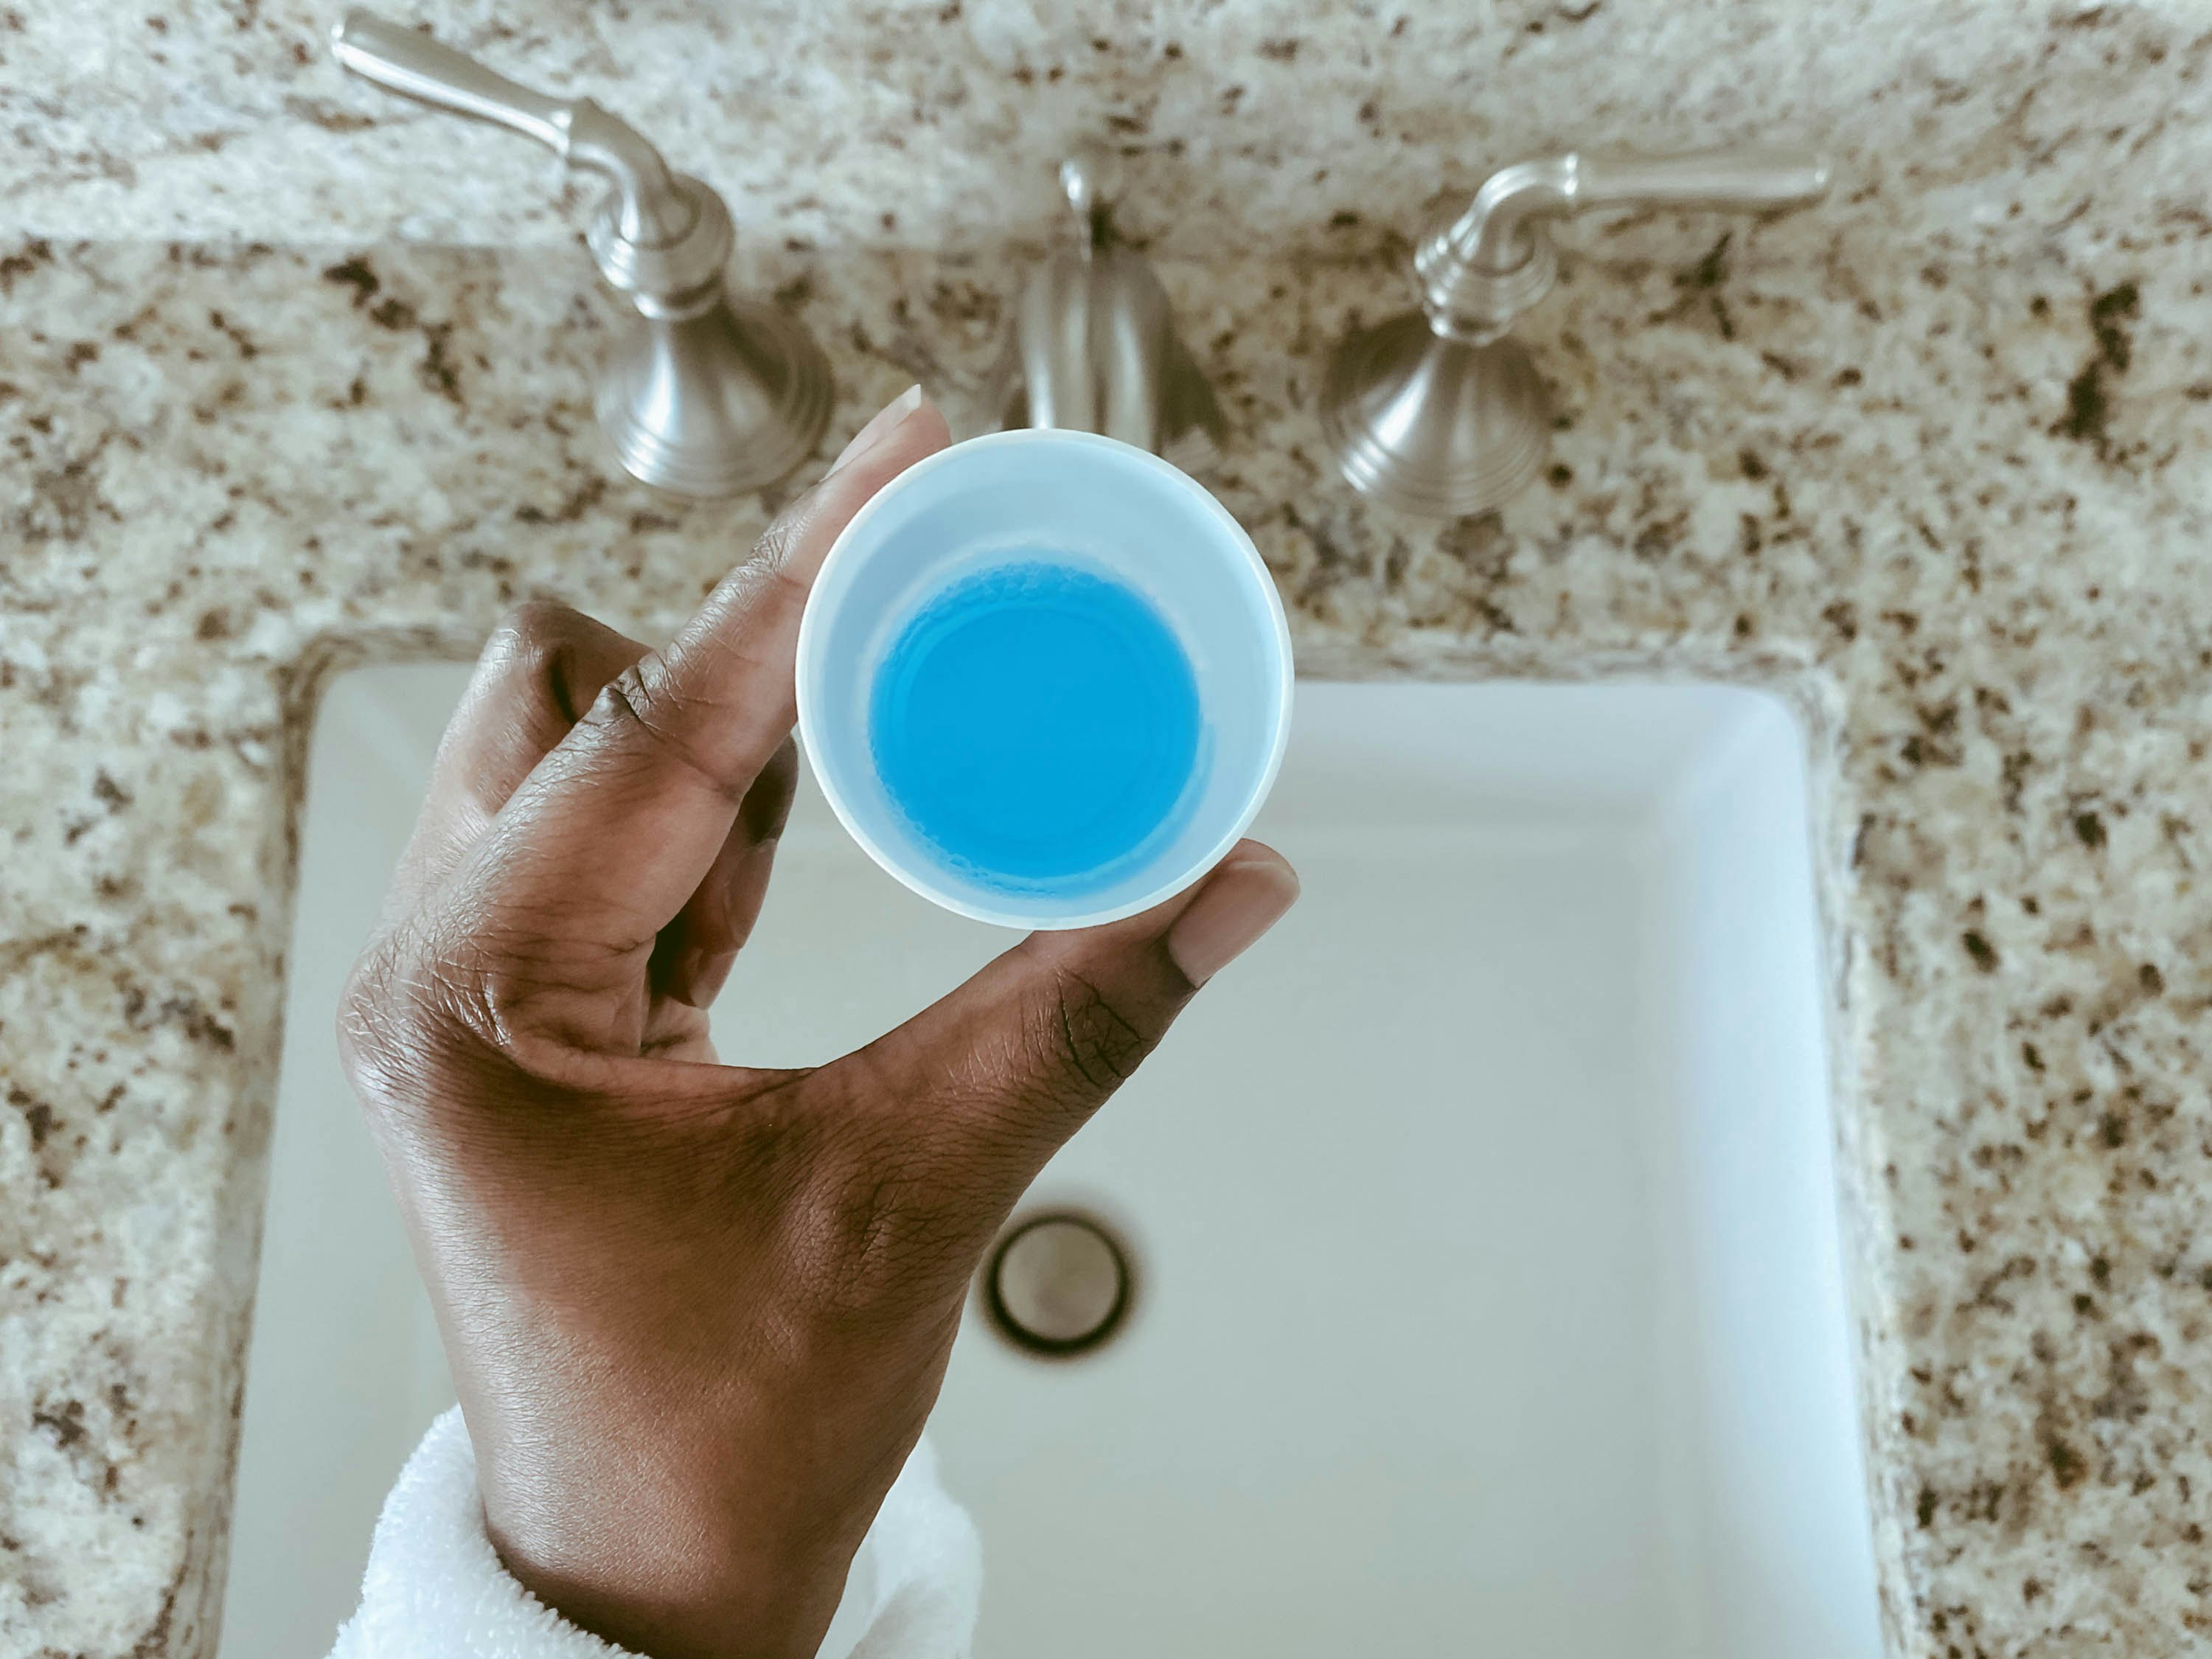 magic mouthwash swish and swallow side effects